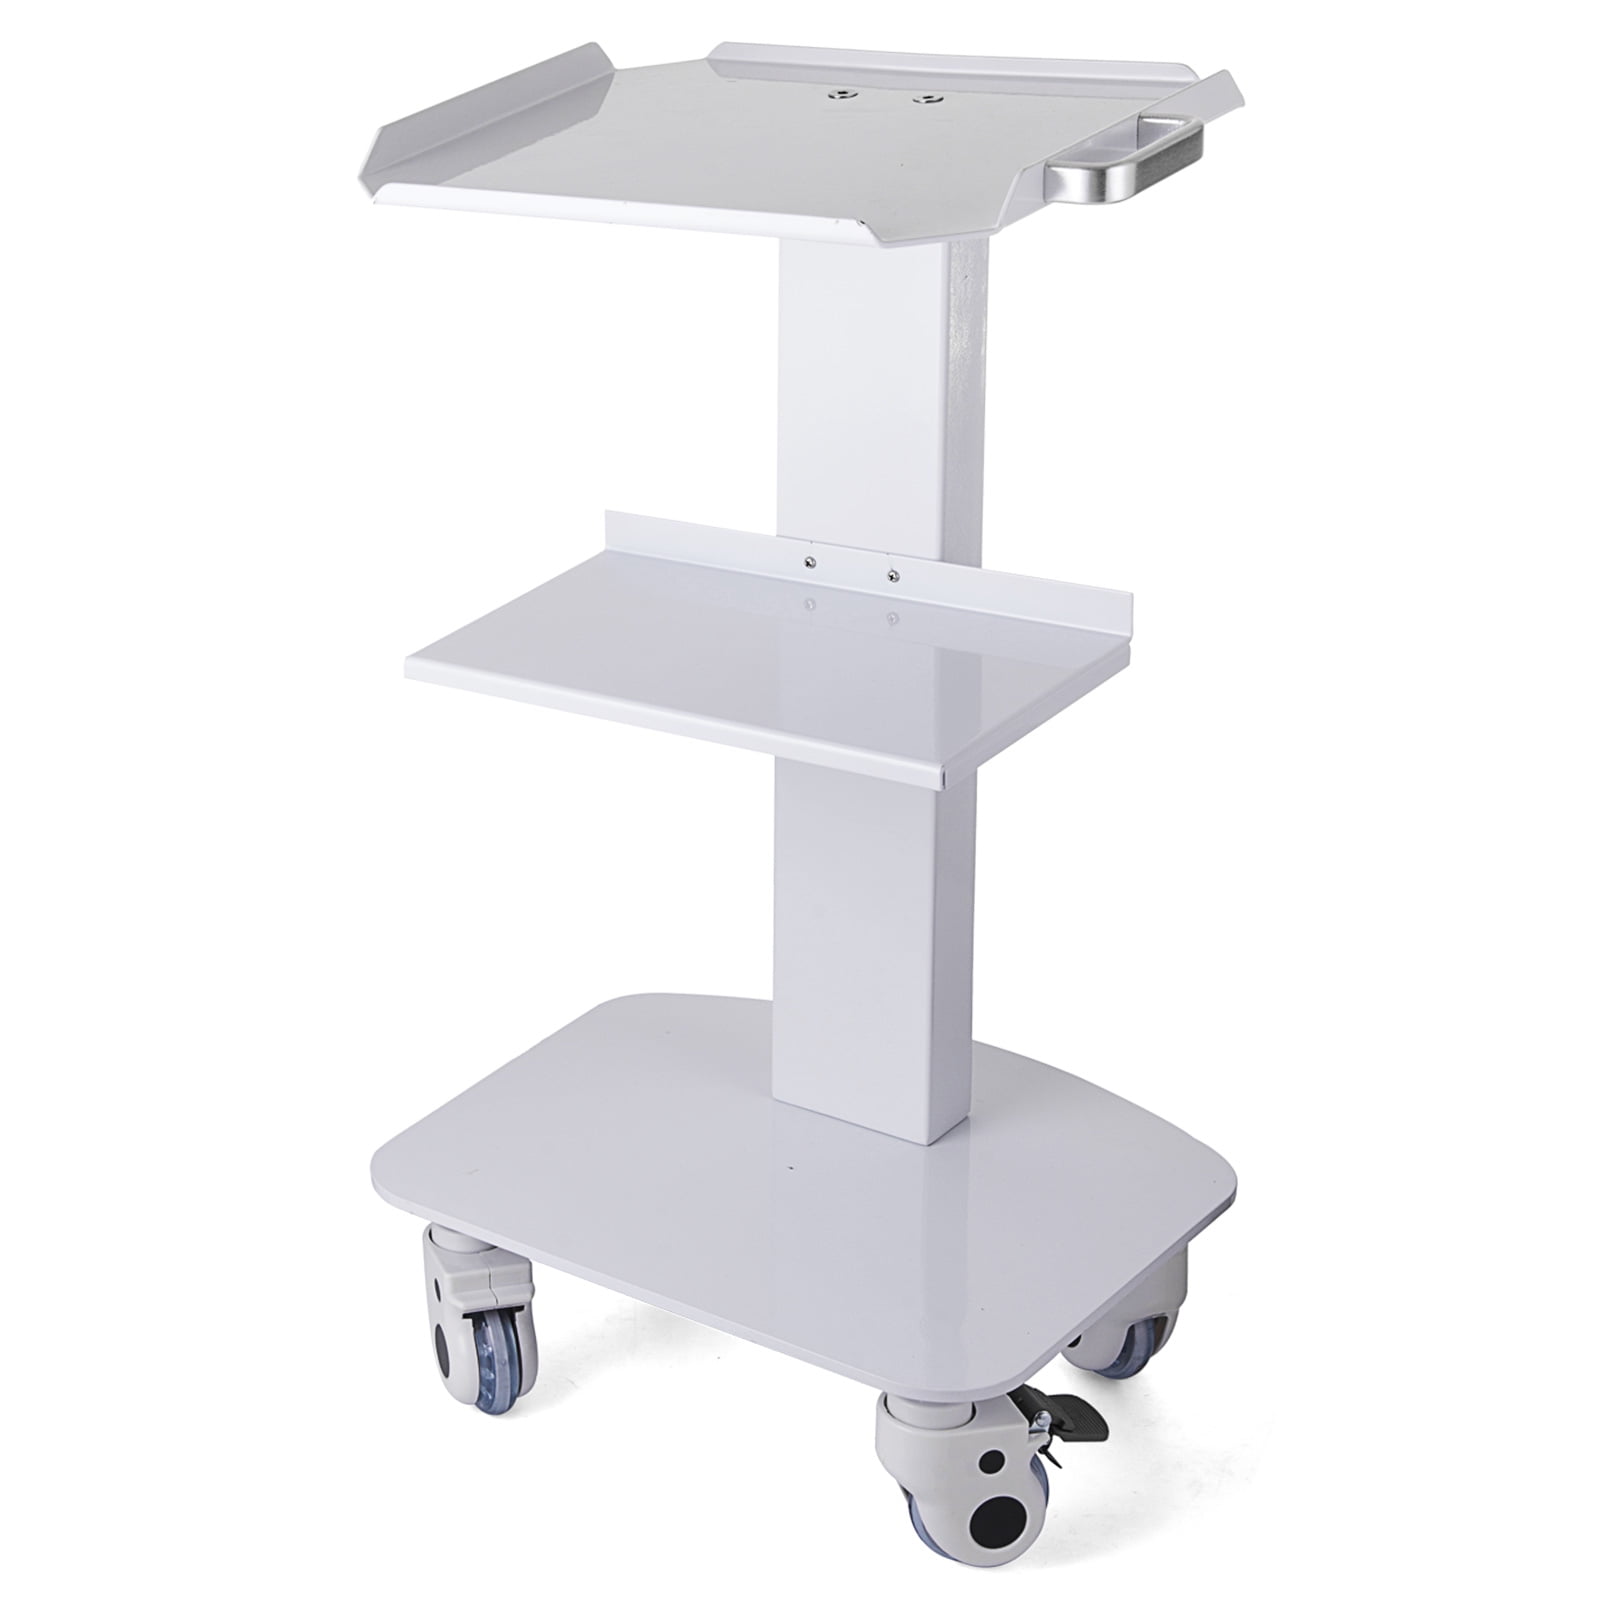 Size : Big 2 Tier Stainless Steel Medical Cart Assemble The Surgical Cart Surgical Dressing Changer Instrument Vehicles for Care Homes and Dentistry First Aid 